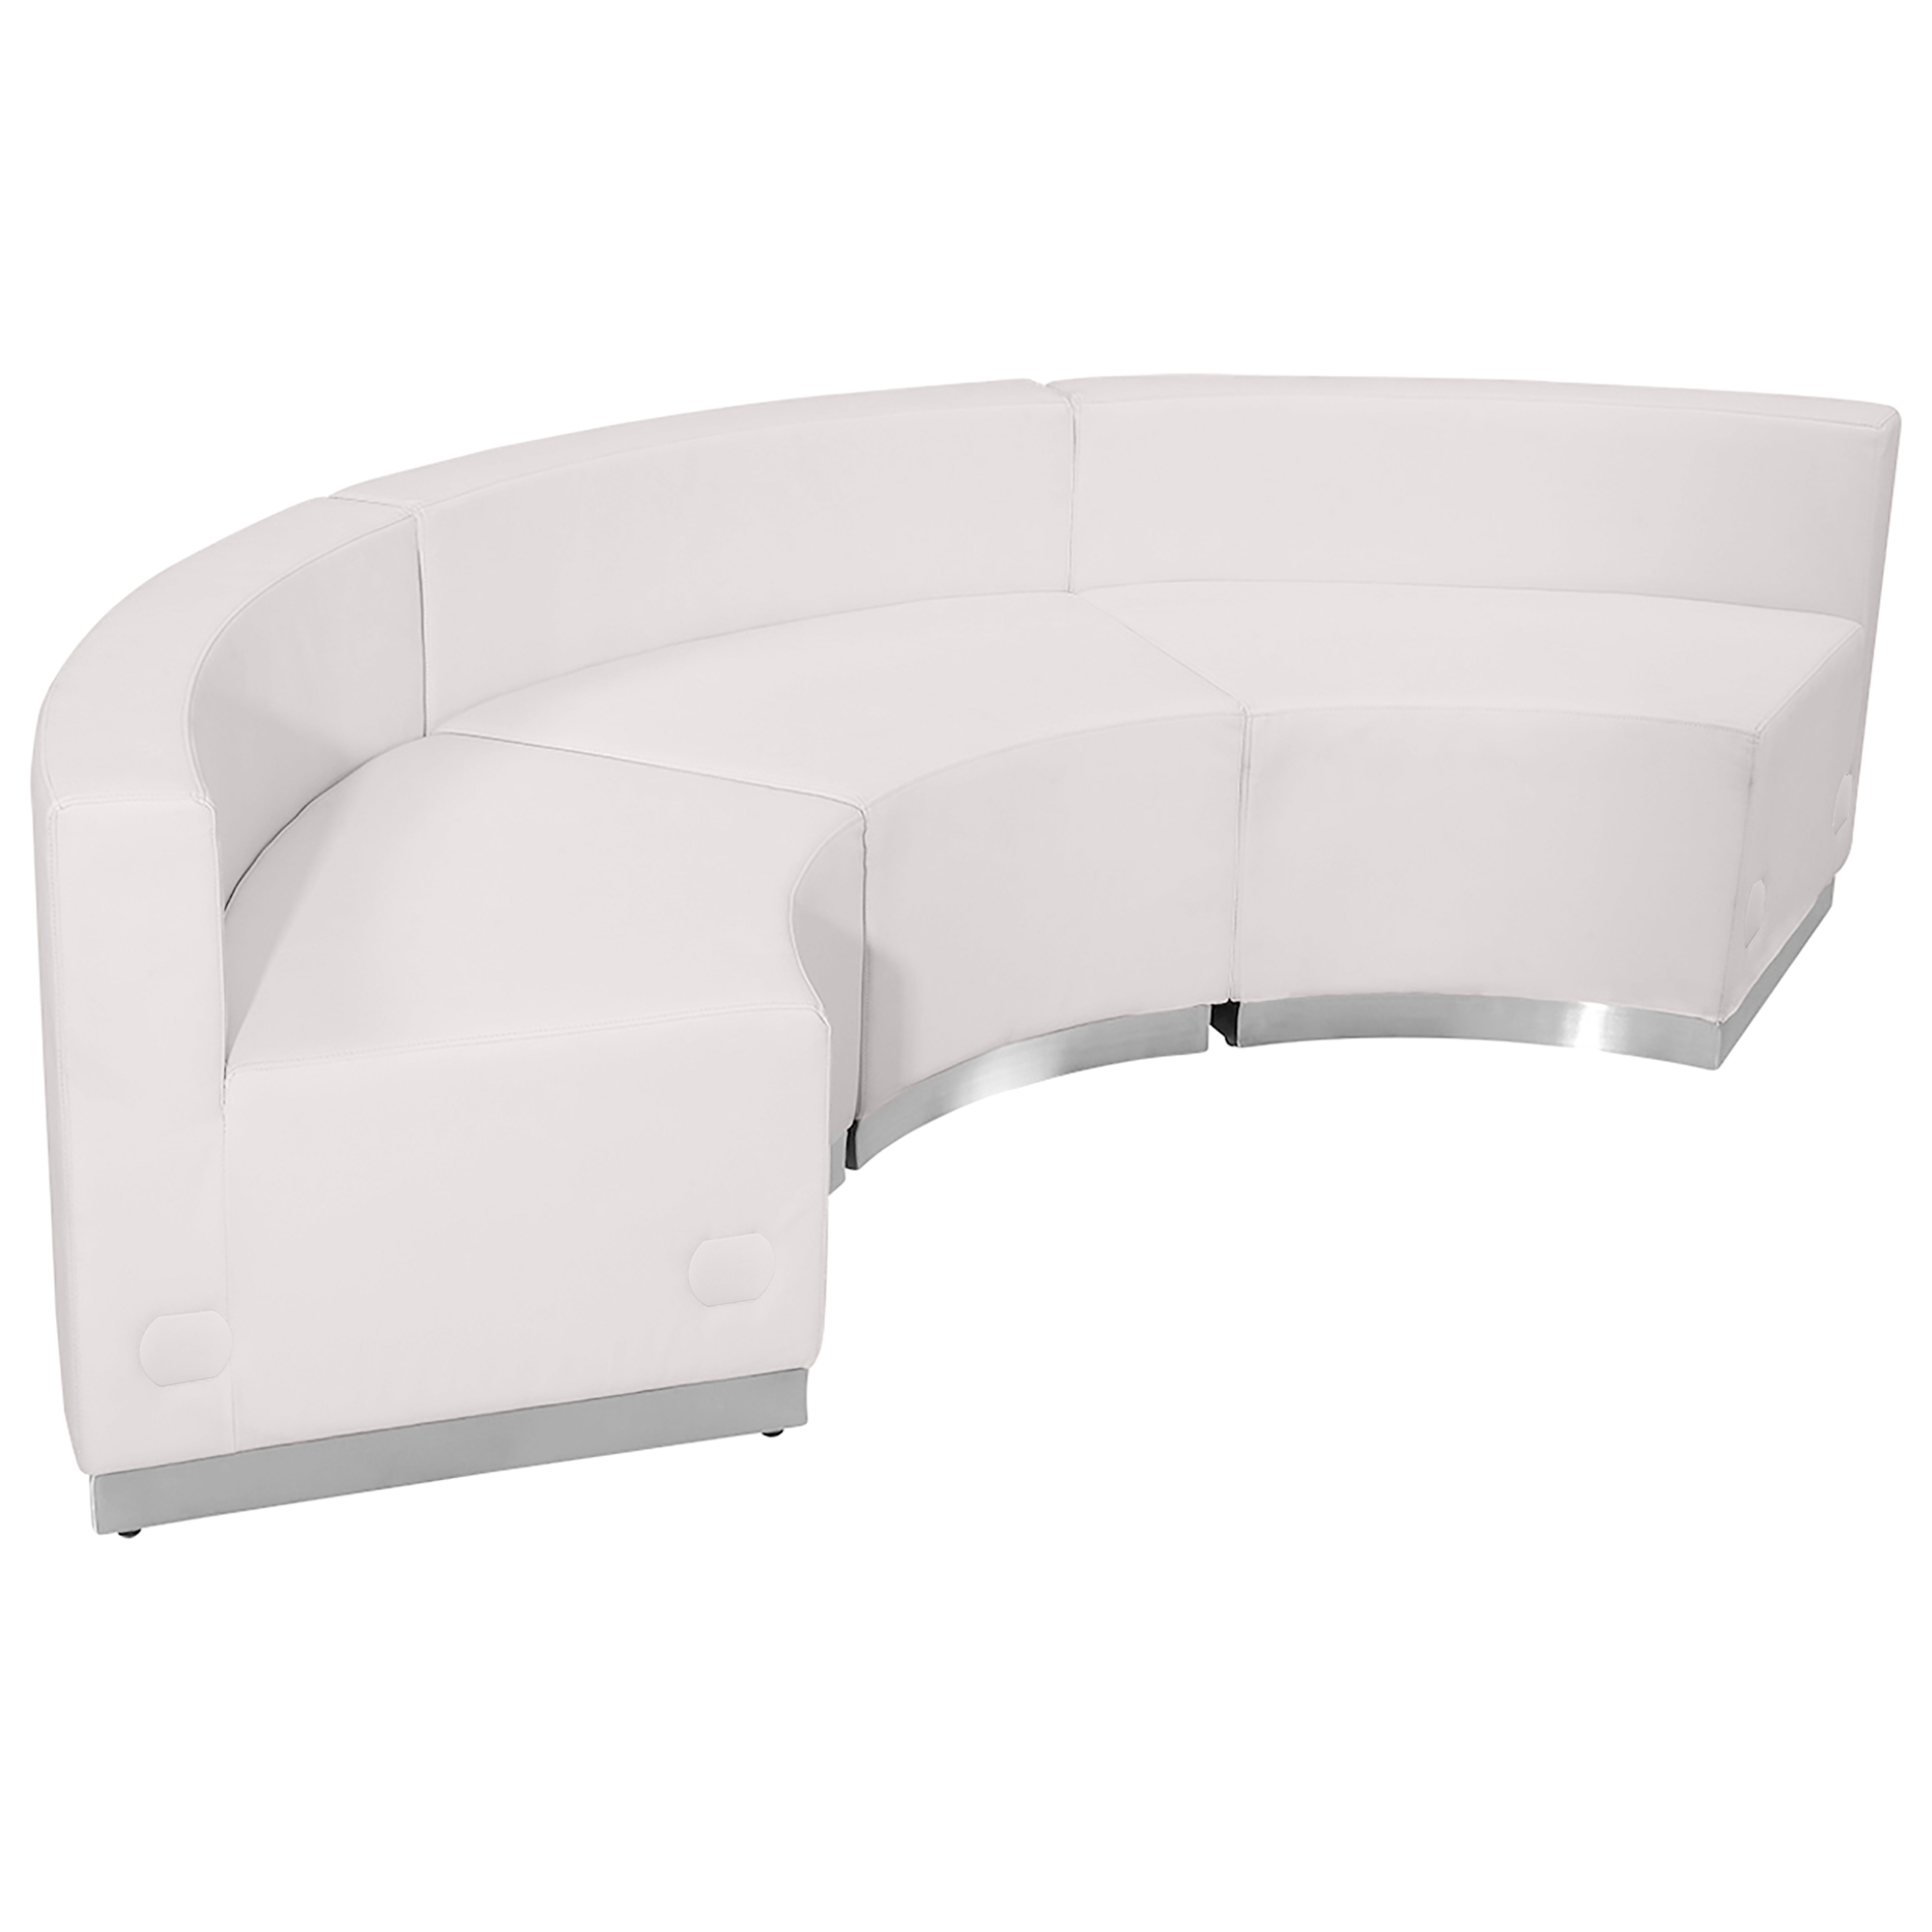 Flash Furniture, 3 PC White LeatherSoft Reception Configuration, Primary Color White, Included (qty.) 3, Model ZB803740SWH